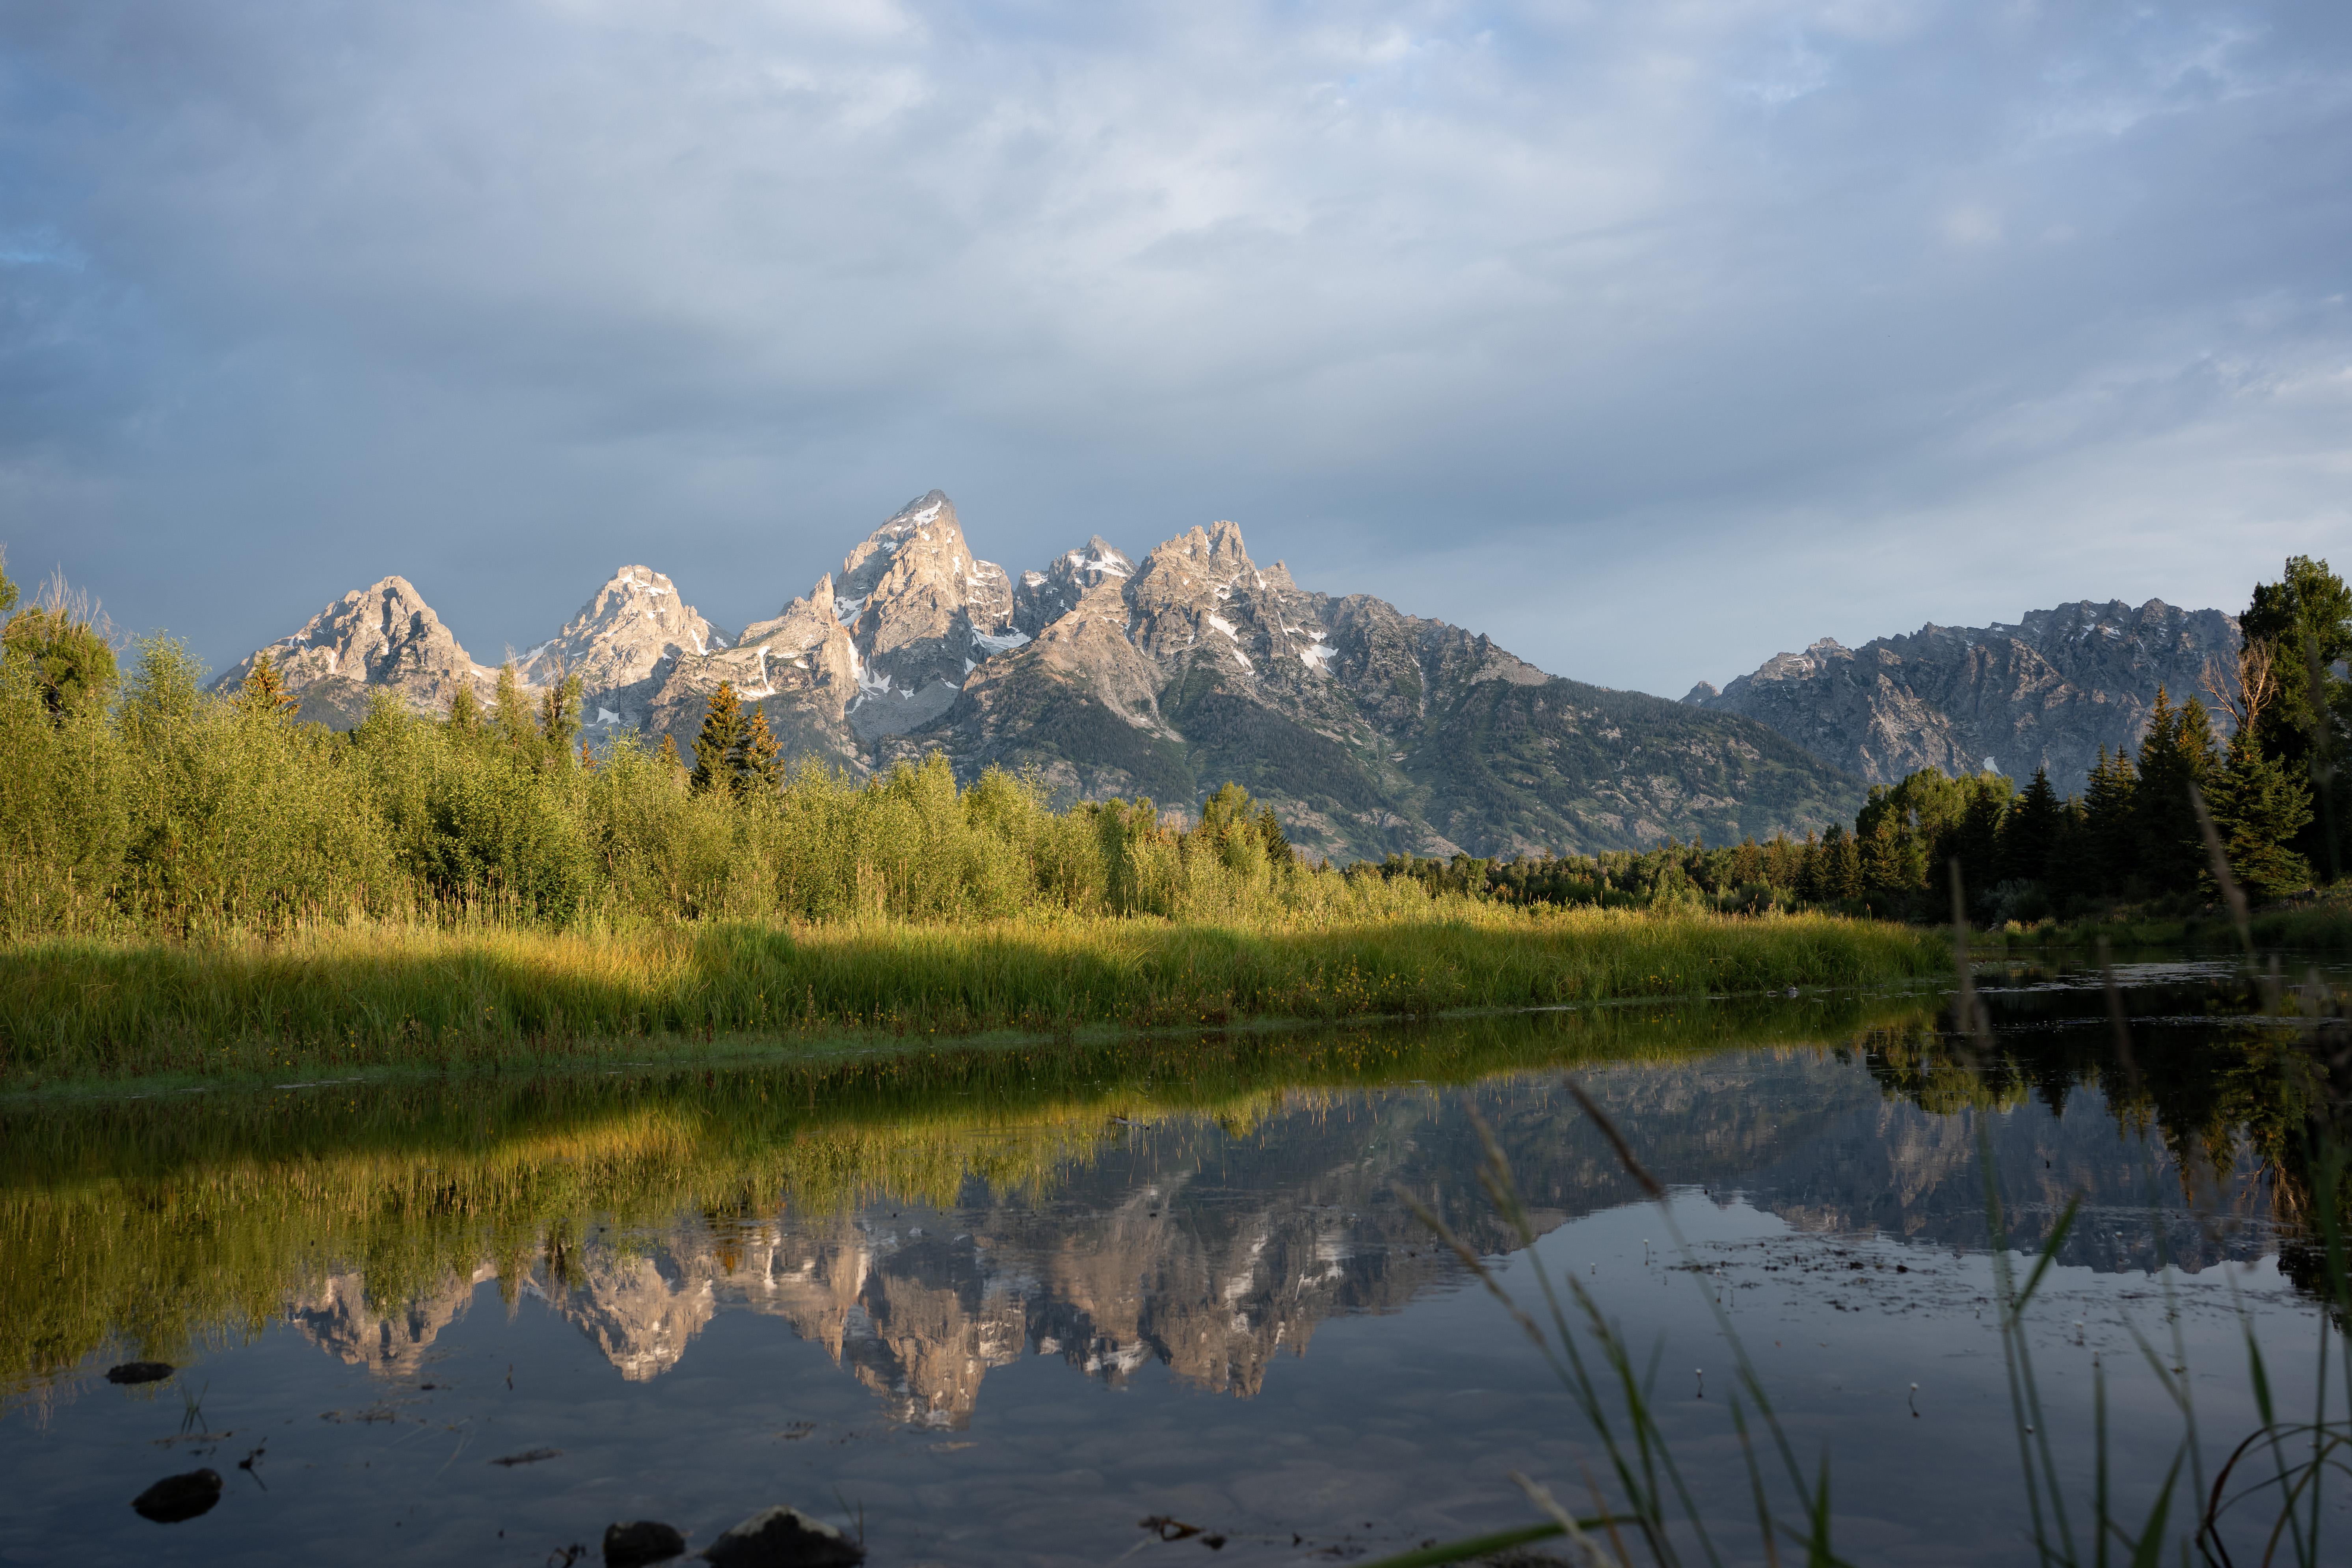 General 5968x3979 Grand Teton National Park Wyoming nature landscape river USA clouds mountains forest water reflection sky trees